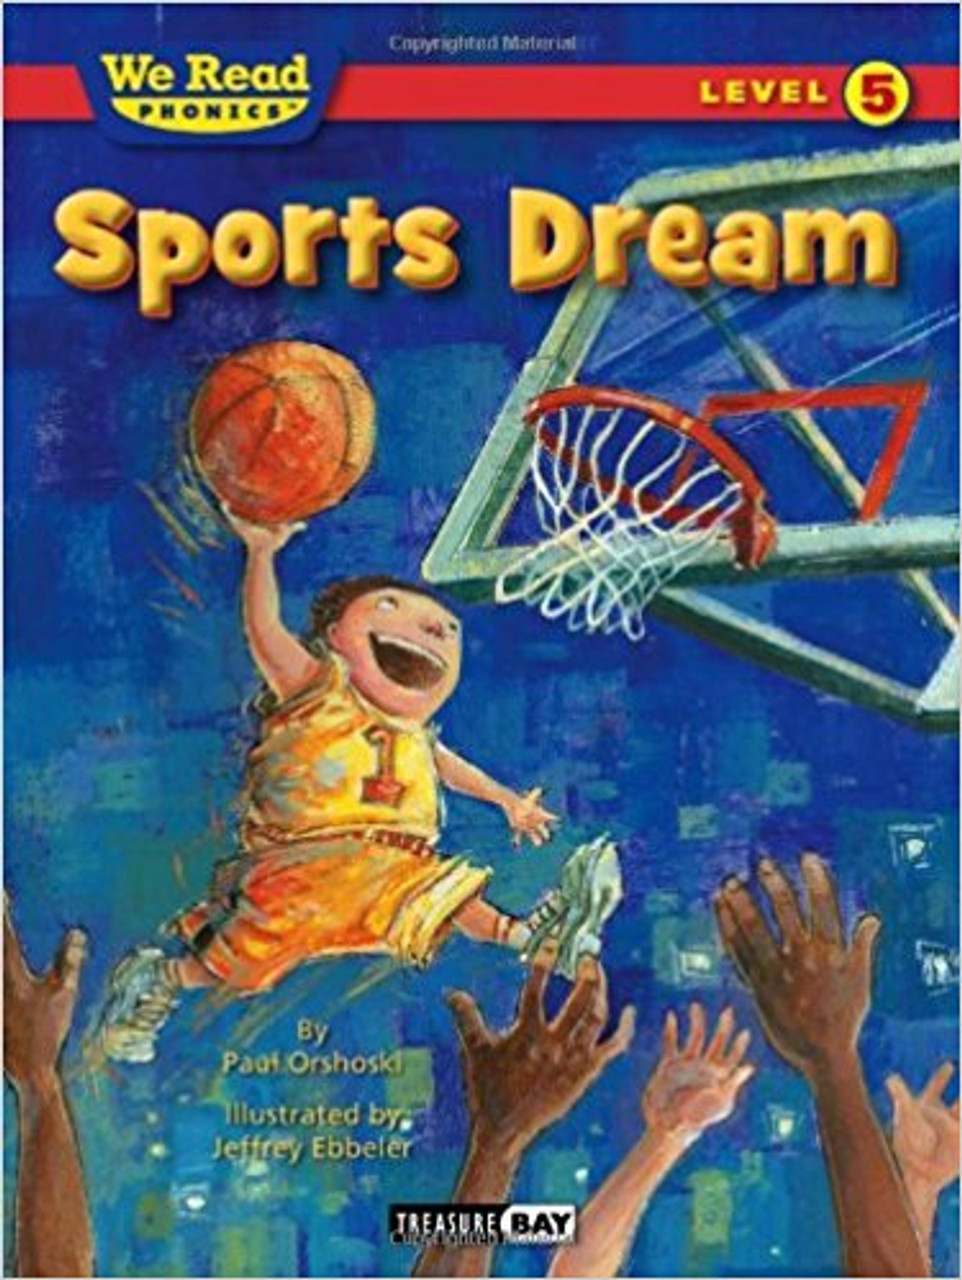 A boy dreams of being a great sports star. In his dreams he is the best player in every sport: basketball, baseball, soccer, hockey, dirt bike races, and even fishing! However, he is really only great at one thing in sports - he is a great sports fan! Both the writing and the illustrations help to make this a very funny book.